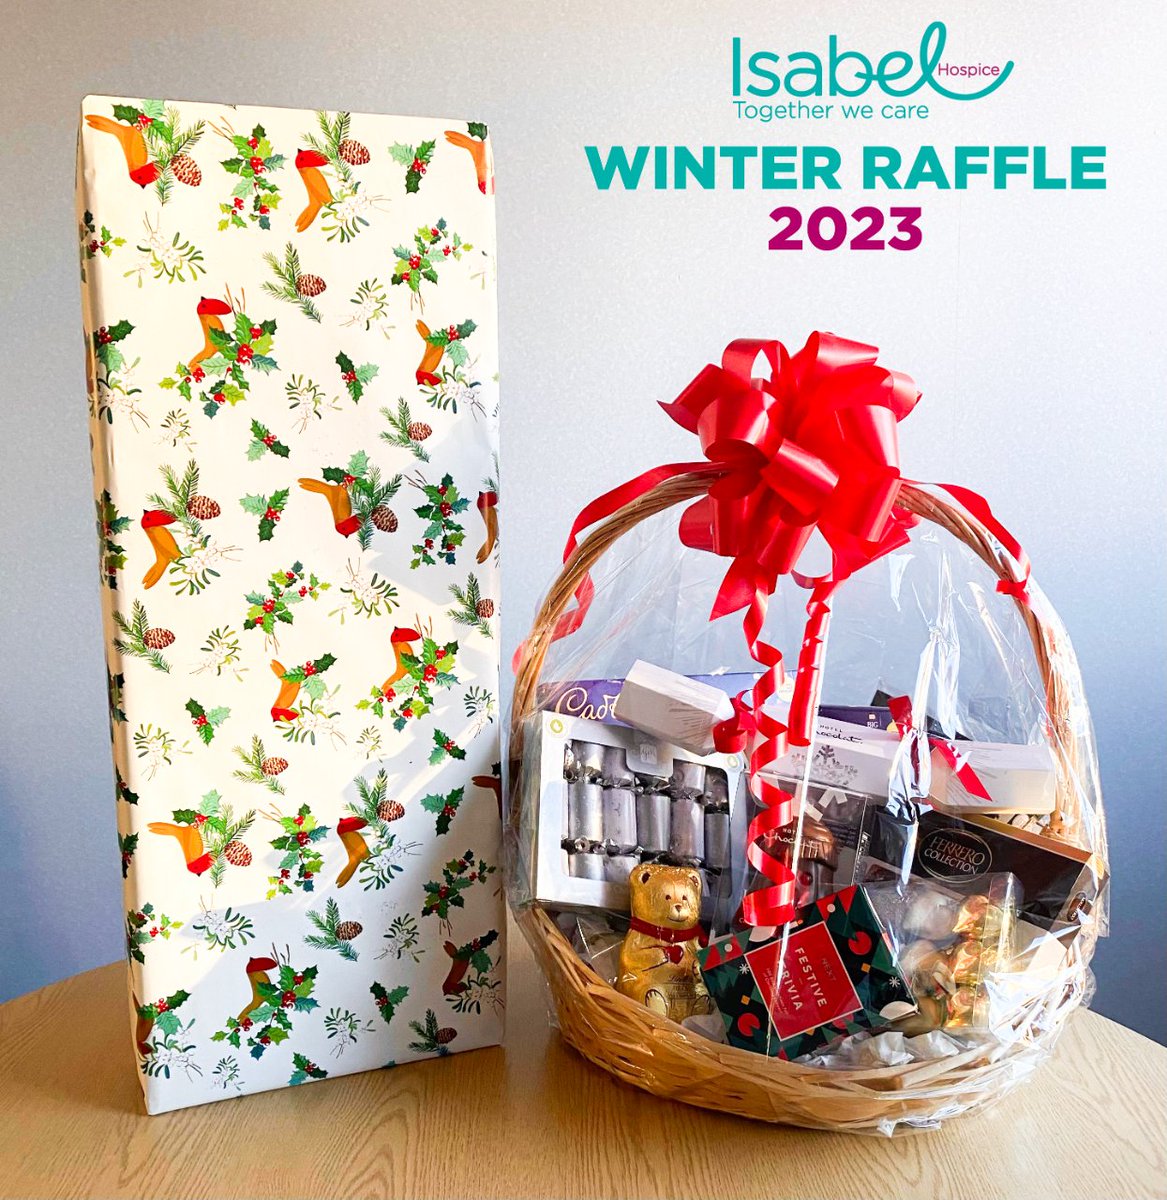 🎉  The winner of the early bird prize has been drawn for our Winter Raffle.  👁️  Keep an eye on our social media on Monday when the lucky winner is revealed. Could it be you? 💰 You can still enter the cash prize draw for a chance to win up to £2000: raffleplayer.com/isabelhospice